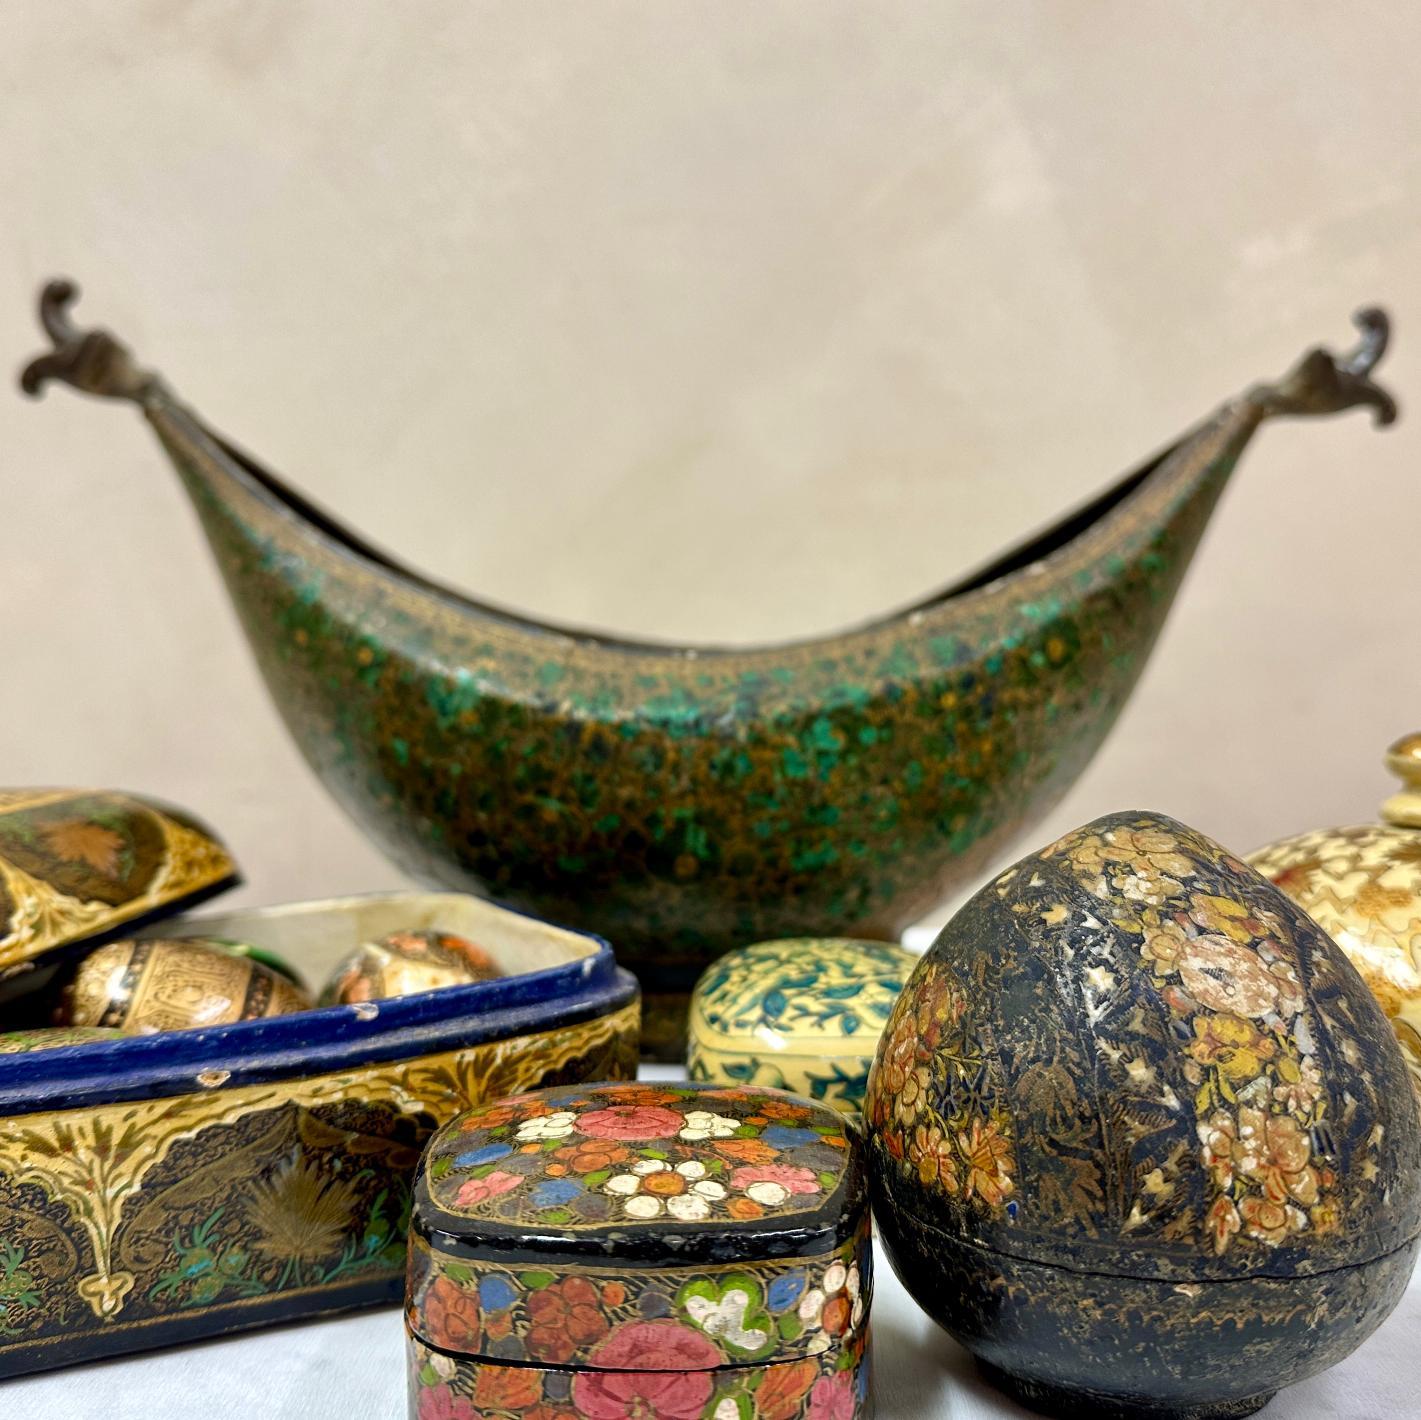 Collection of c1900-1950's paper mache trinket boxes and objects from Kashmir, to include:
Hand painted 
Brass / papier mache Beggars Bowl
8 Decorative Eggs 
Large papier mache Box
4 small Trinket Boxes

Sizes vary:
Beggars Bowl - Length - 40